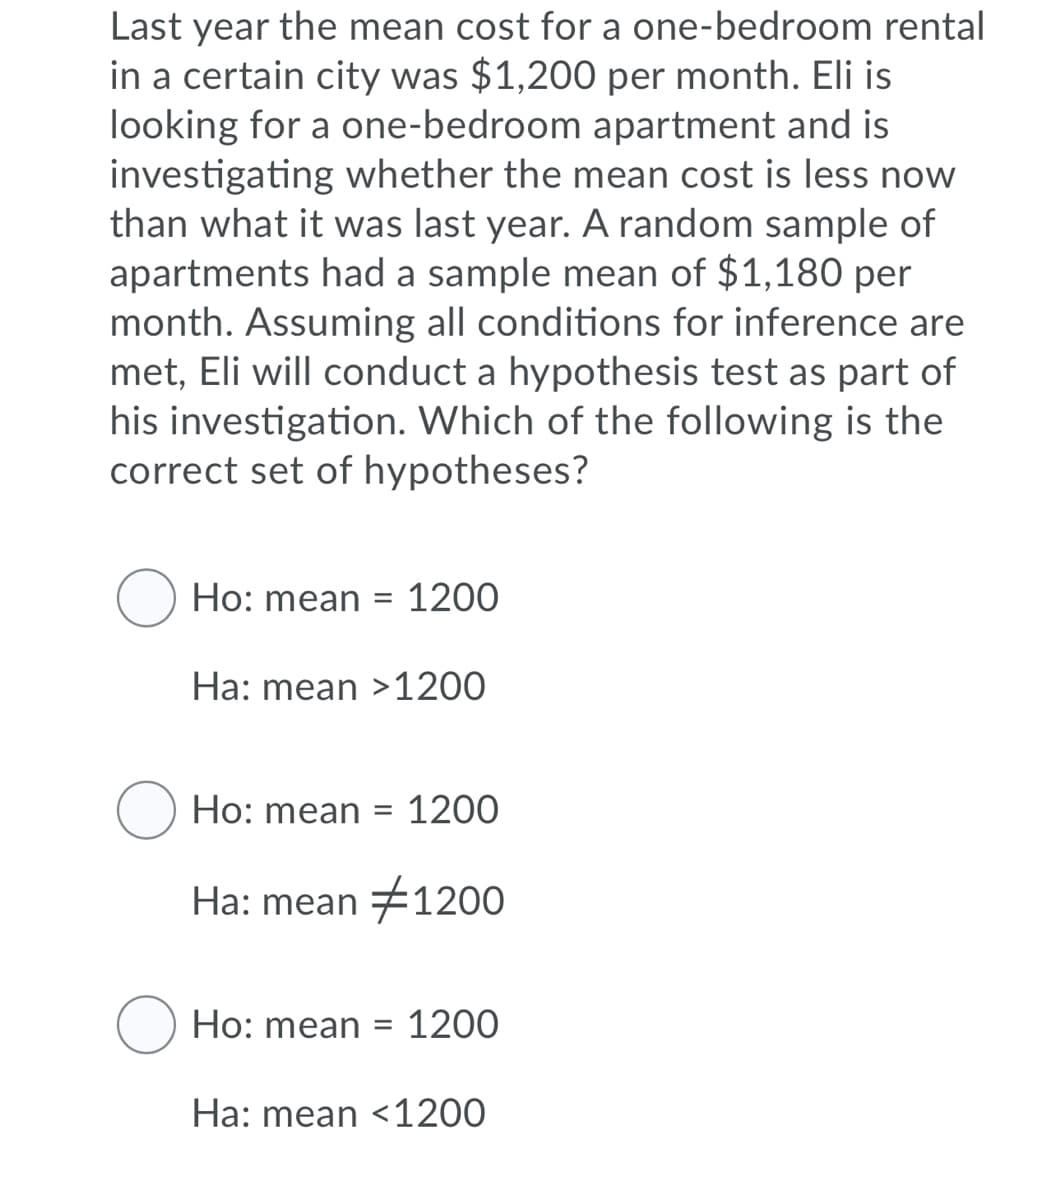 Last year the mean cost for a one-bedroom rental
in a certain city was $1,200 per month. Eli is
looking for a one-bedroom apartment and is
investigating whether the mean cost is less now
than what it was last year. A random sample of
apartments had a sample mean of $1,180 per
month. Assuming all conditions for inference are
met, Eli will conduct a hypothesis test as part of
his investigation. Which of the following is the
correct set of hypotheses?
Ho: mean =
1200
Ha: mean >1200
Ho: mean =
1200
Ha: mean #1200
Ho: mean =
1200
Ha: mean <1200
